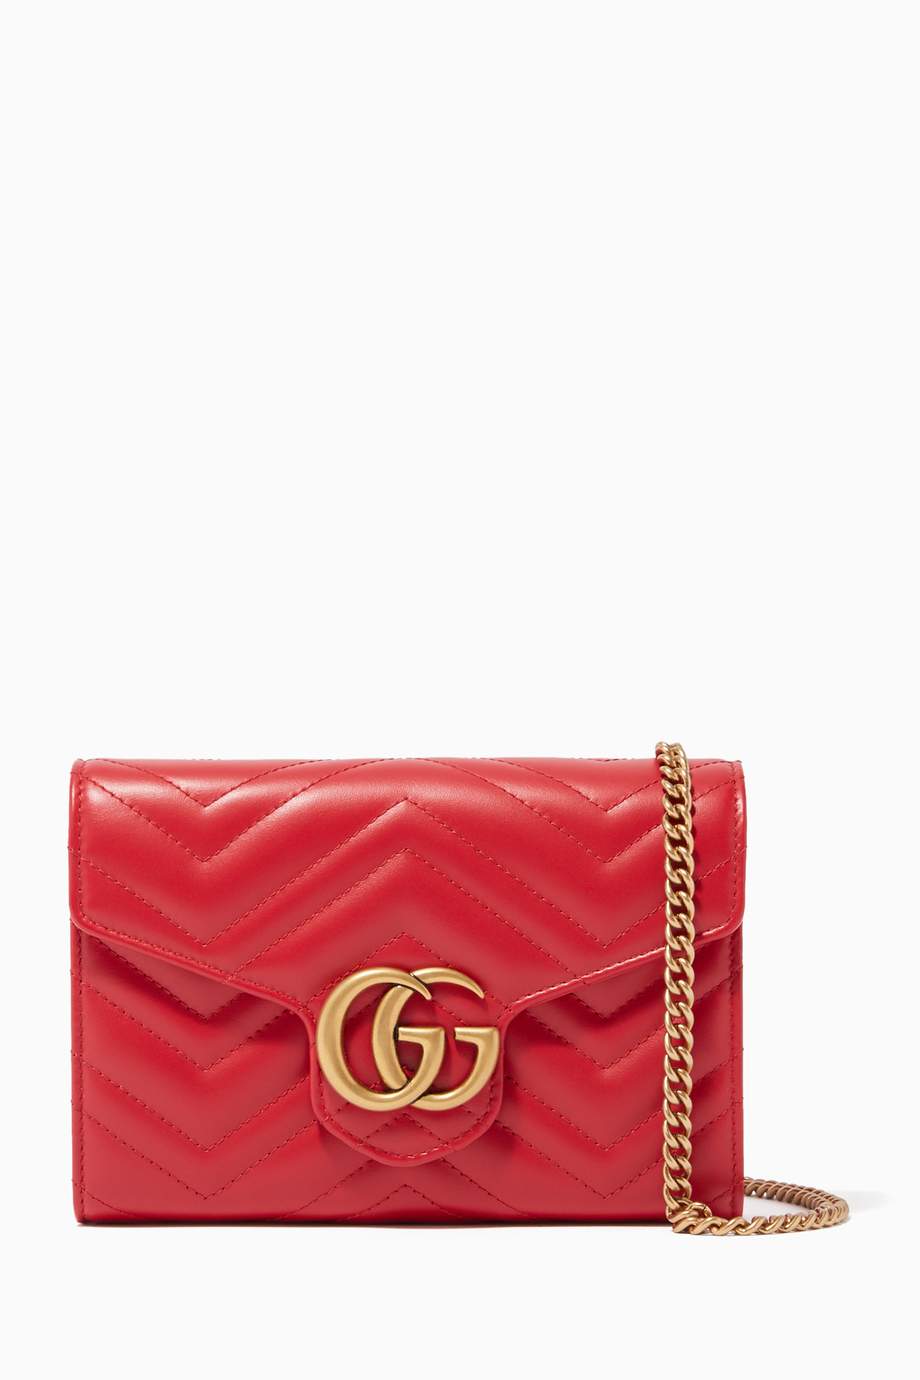 plejeforældre scarp akse Shop Gucci Red GG Marmont Chevron Quilted Wallet on Chain for Women |  Ounass Saudi